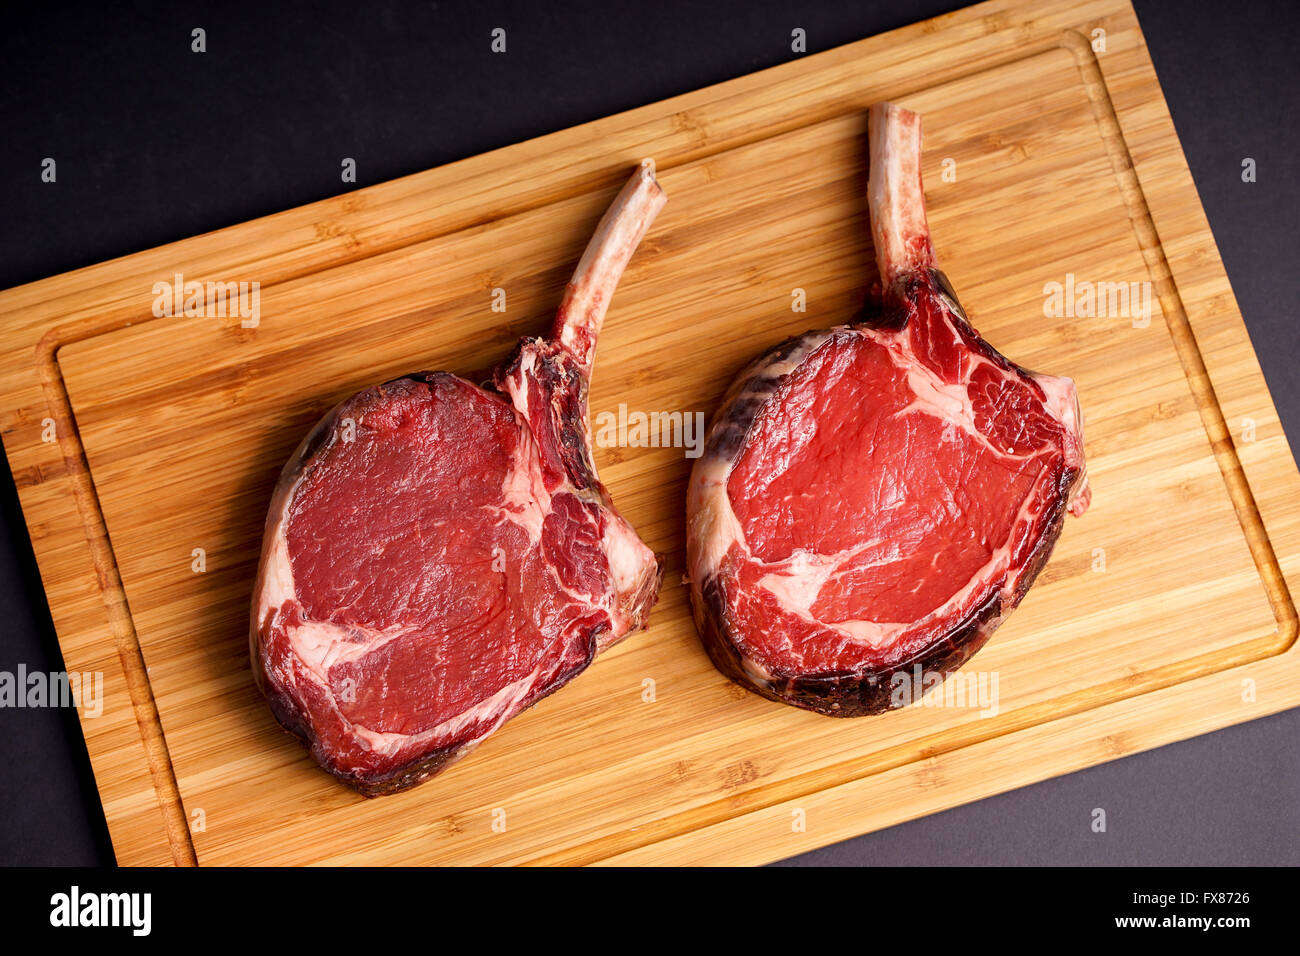 Raw Dry aged tender delicious Tomahawk Steak Stock Photo